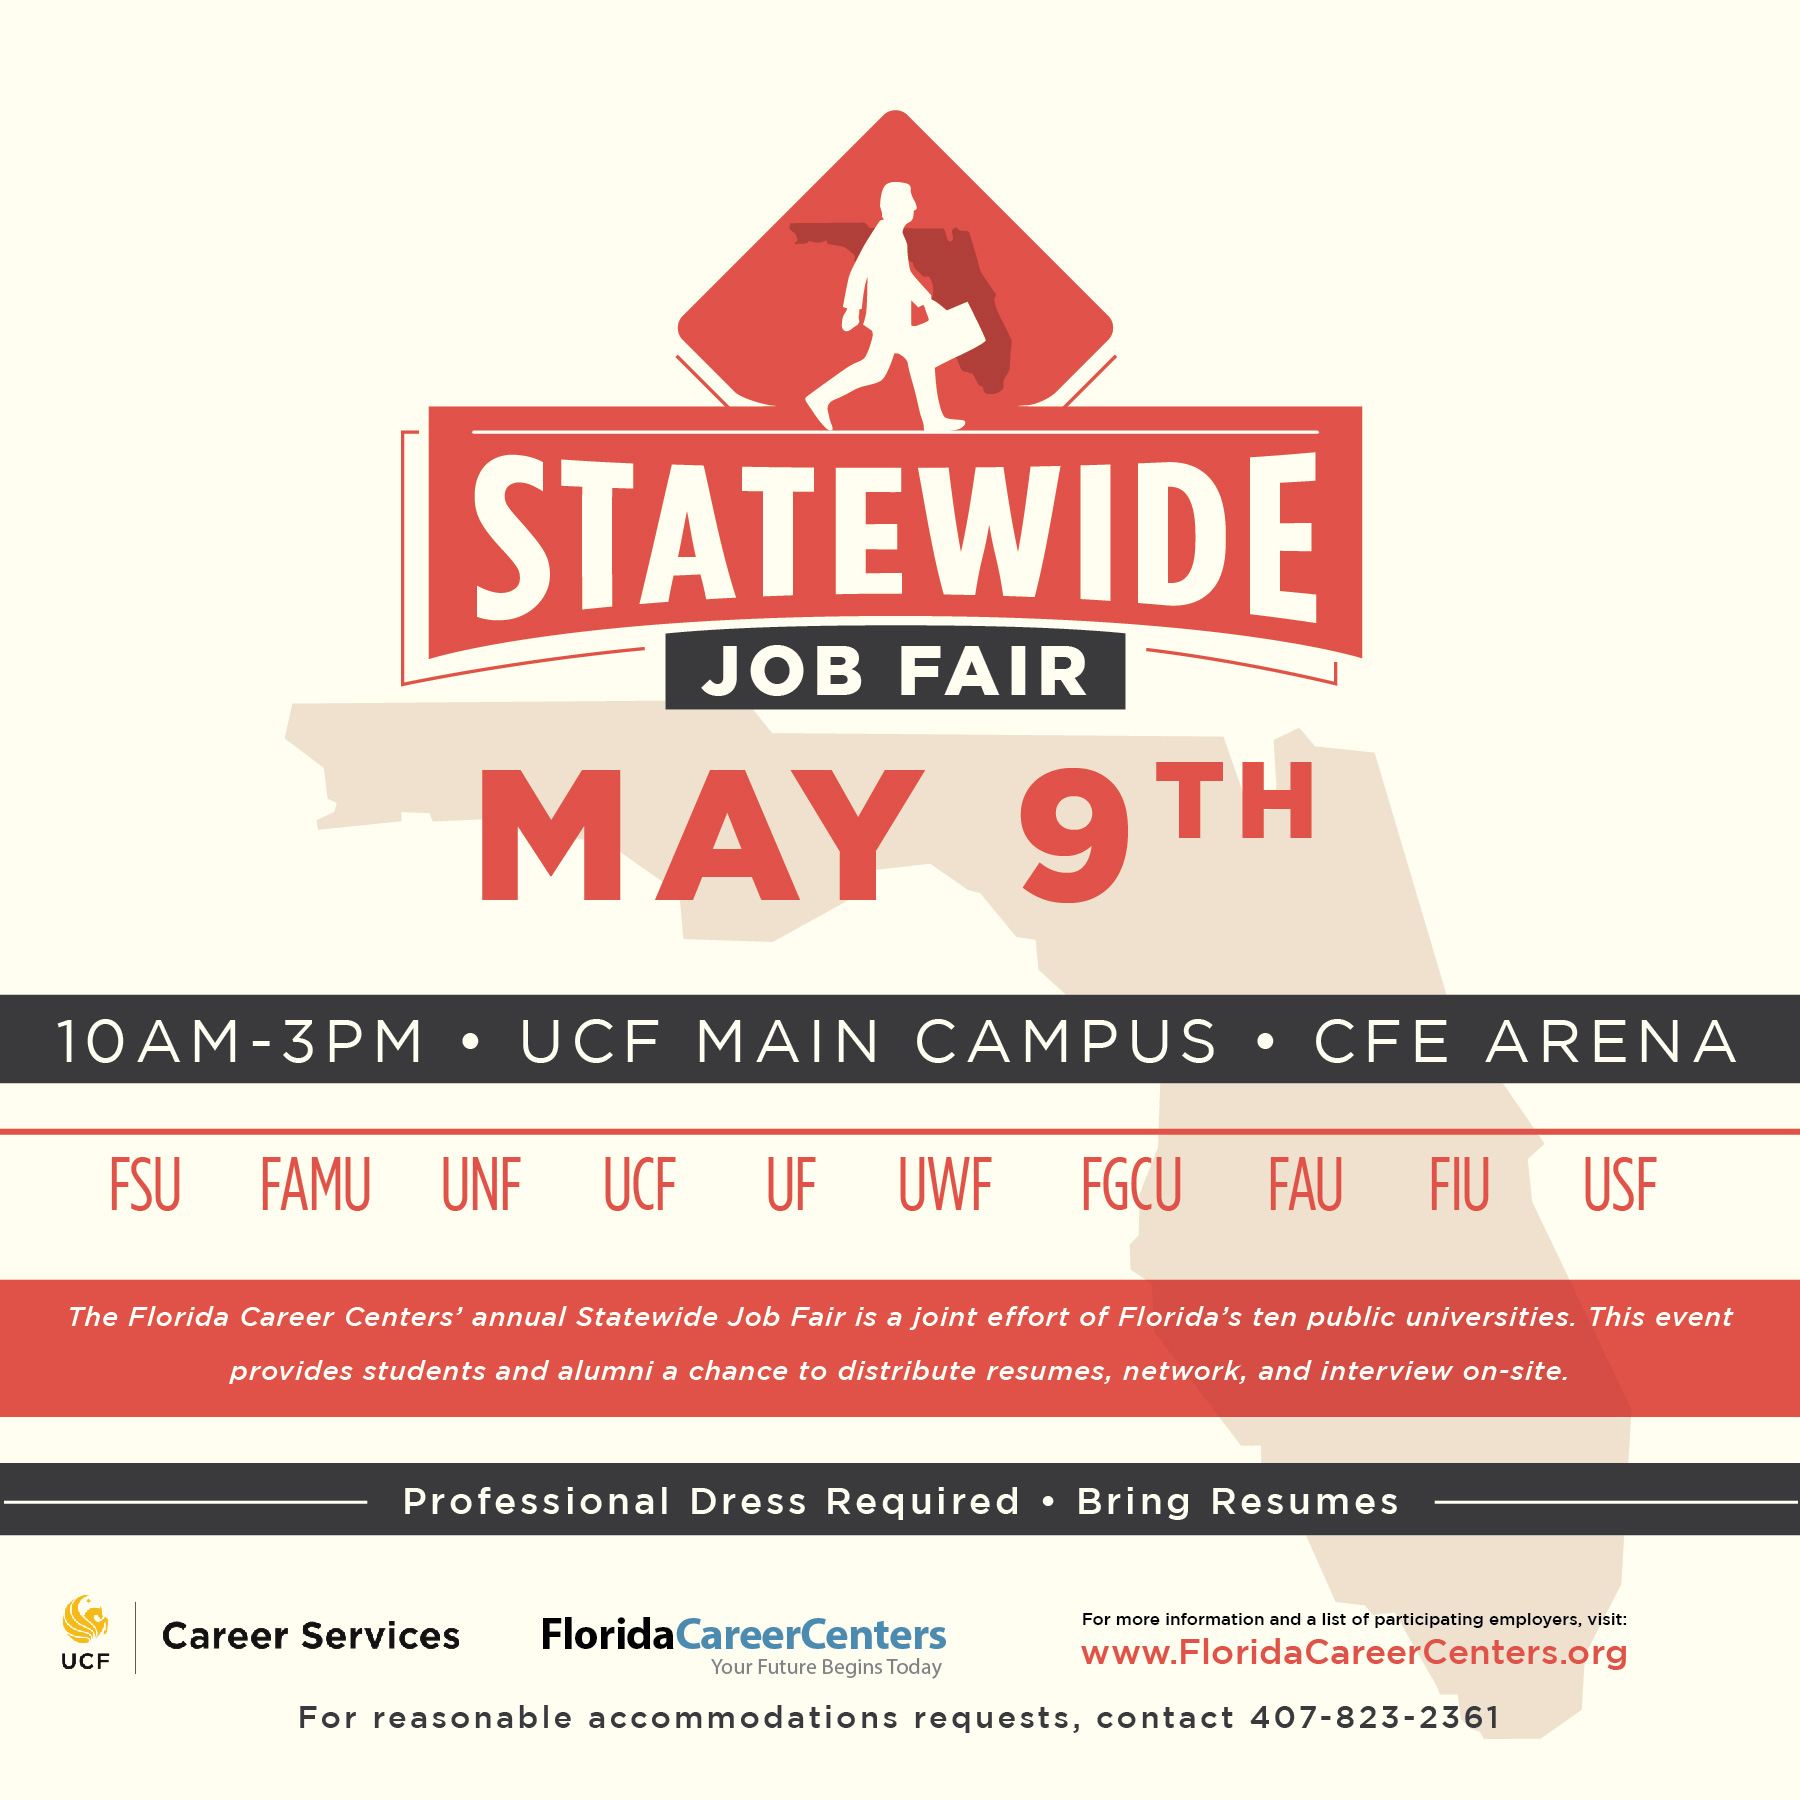 Statewide Job Fair • Career Services • UCF